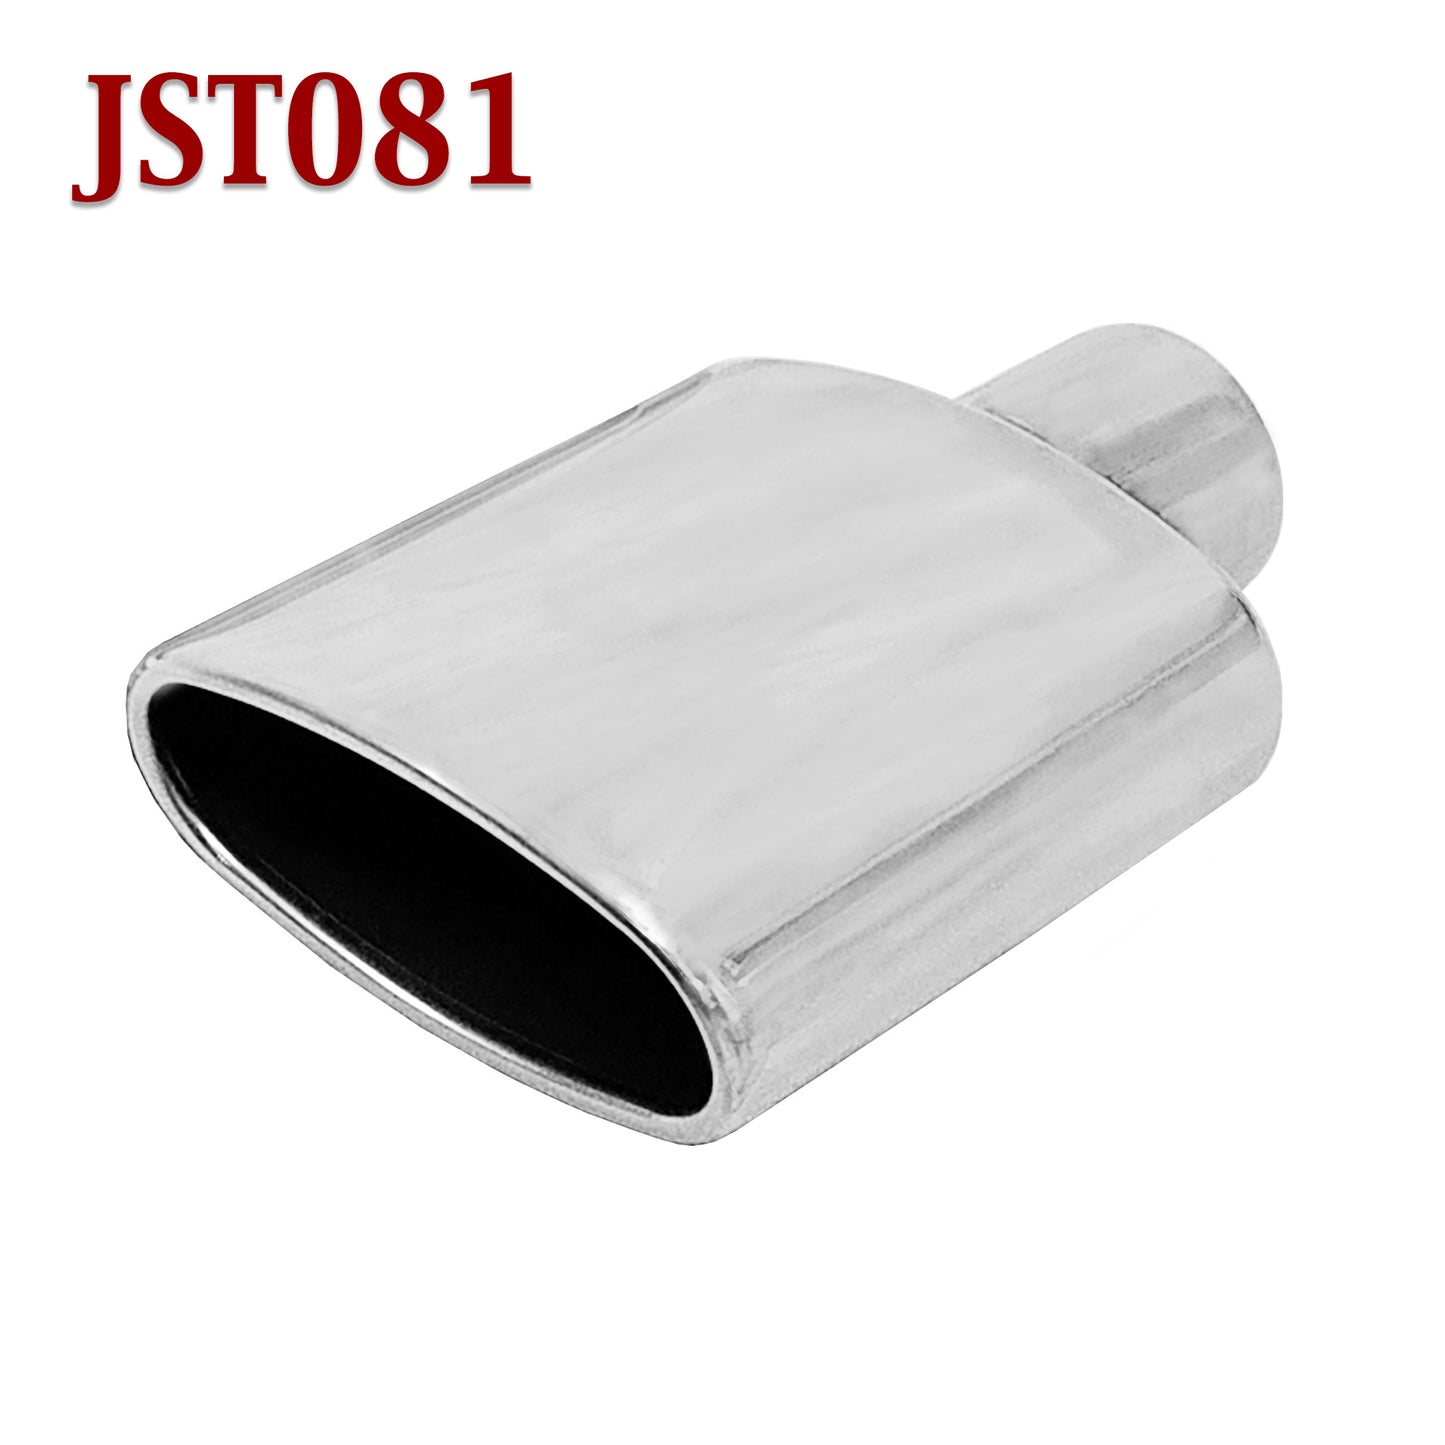 JST081 2.25" Stainless Oval Exhaust Tip 2 1/4" Inlet / 6" x 2 7/8" Outlet / 6" Long